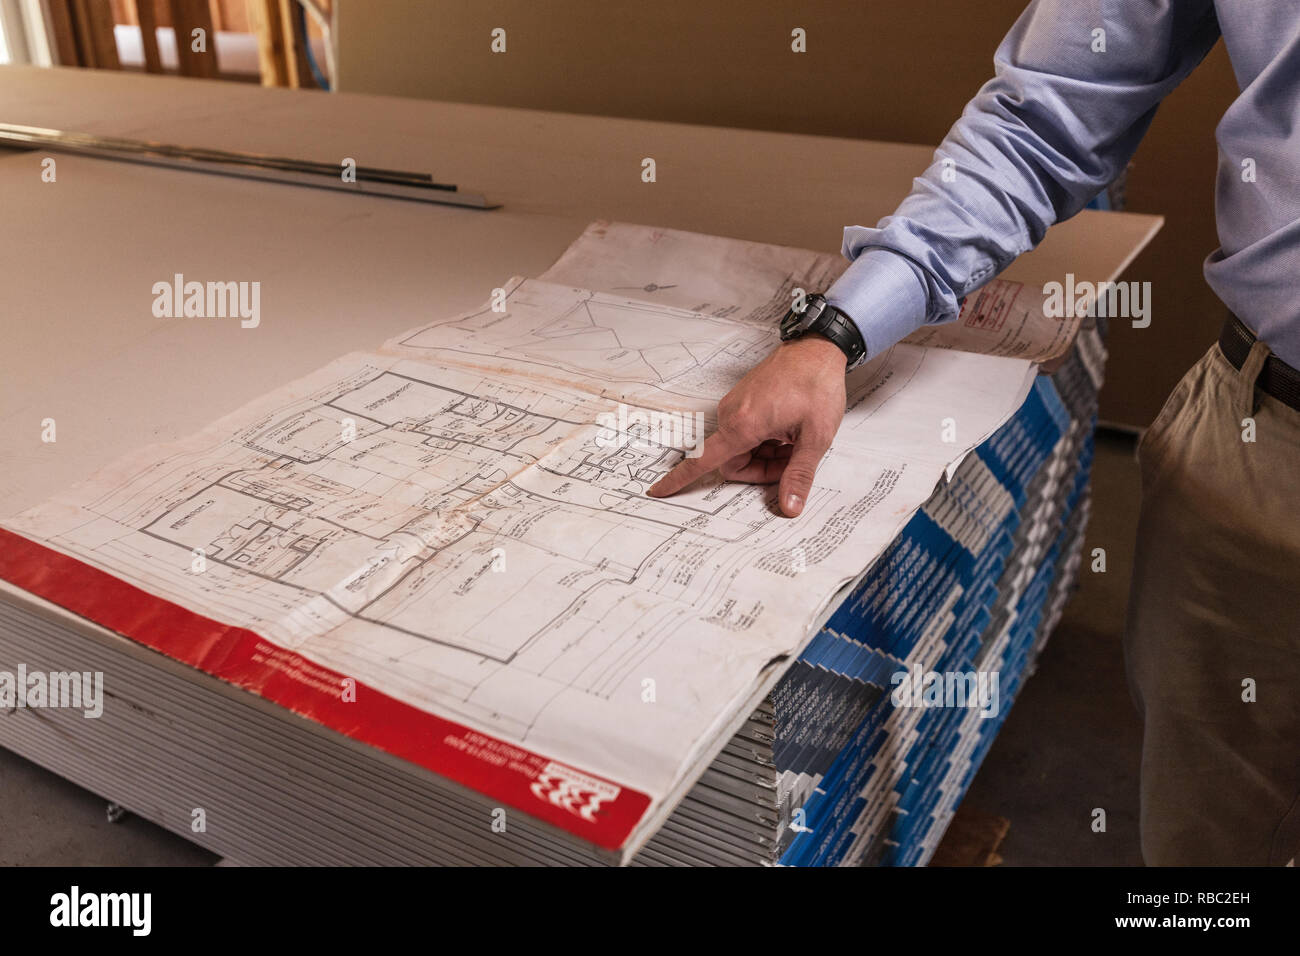 Man Pointing At Architectural Blueprint Stock Photo